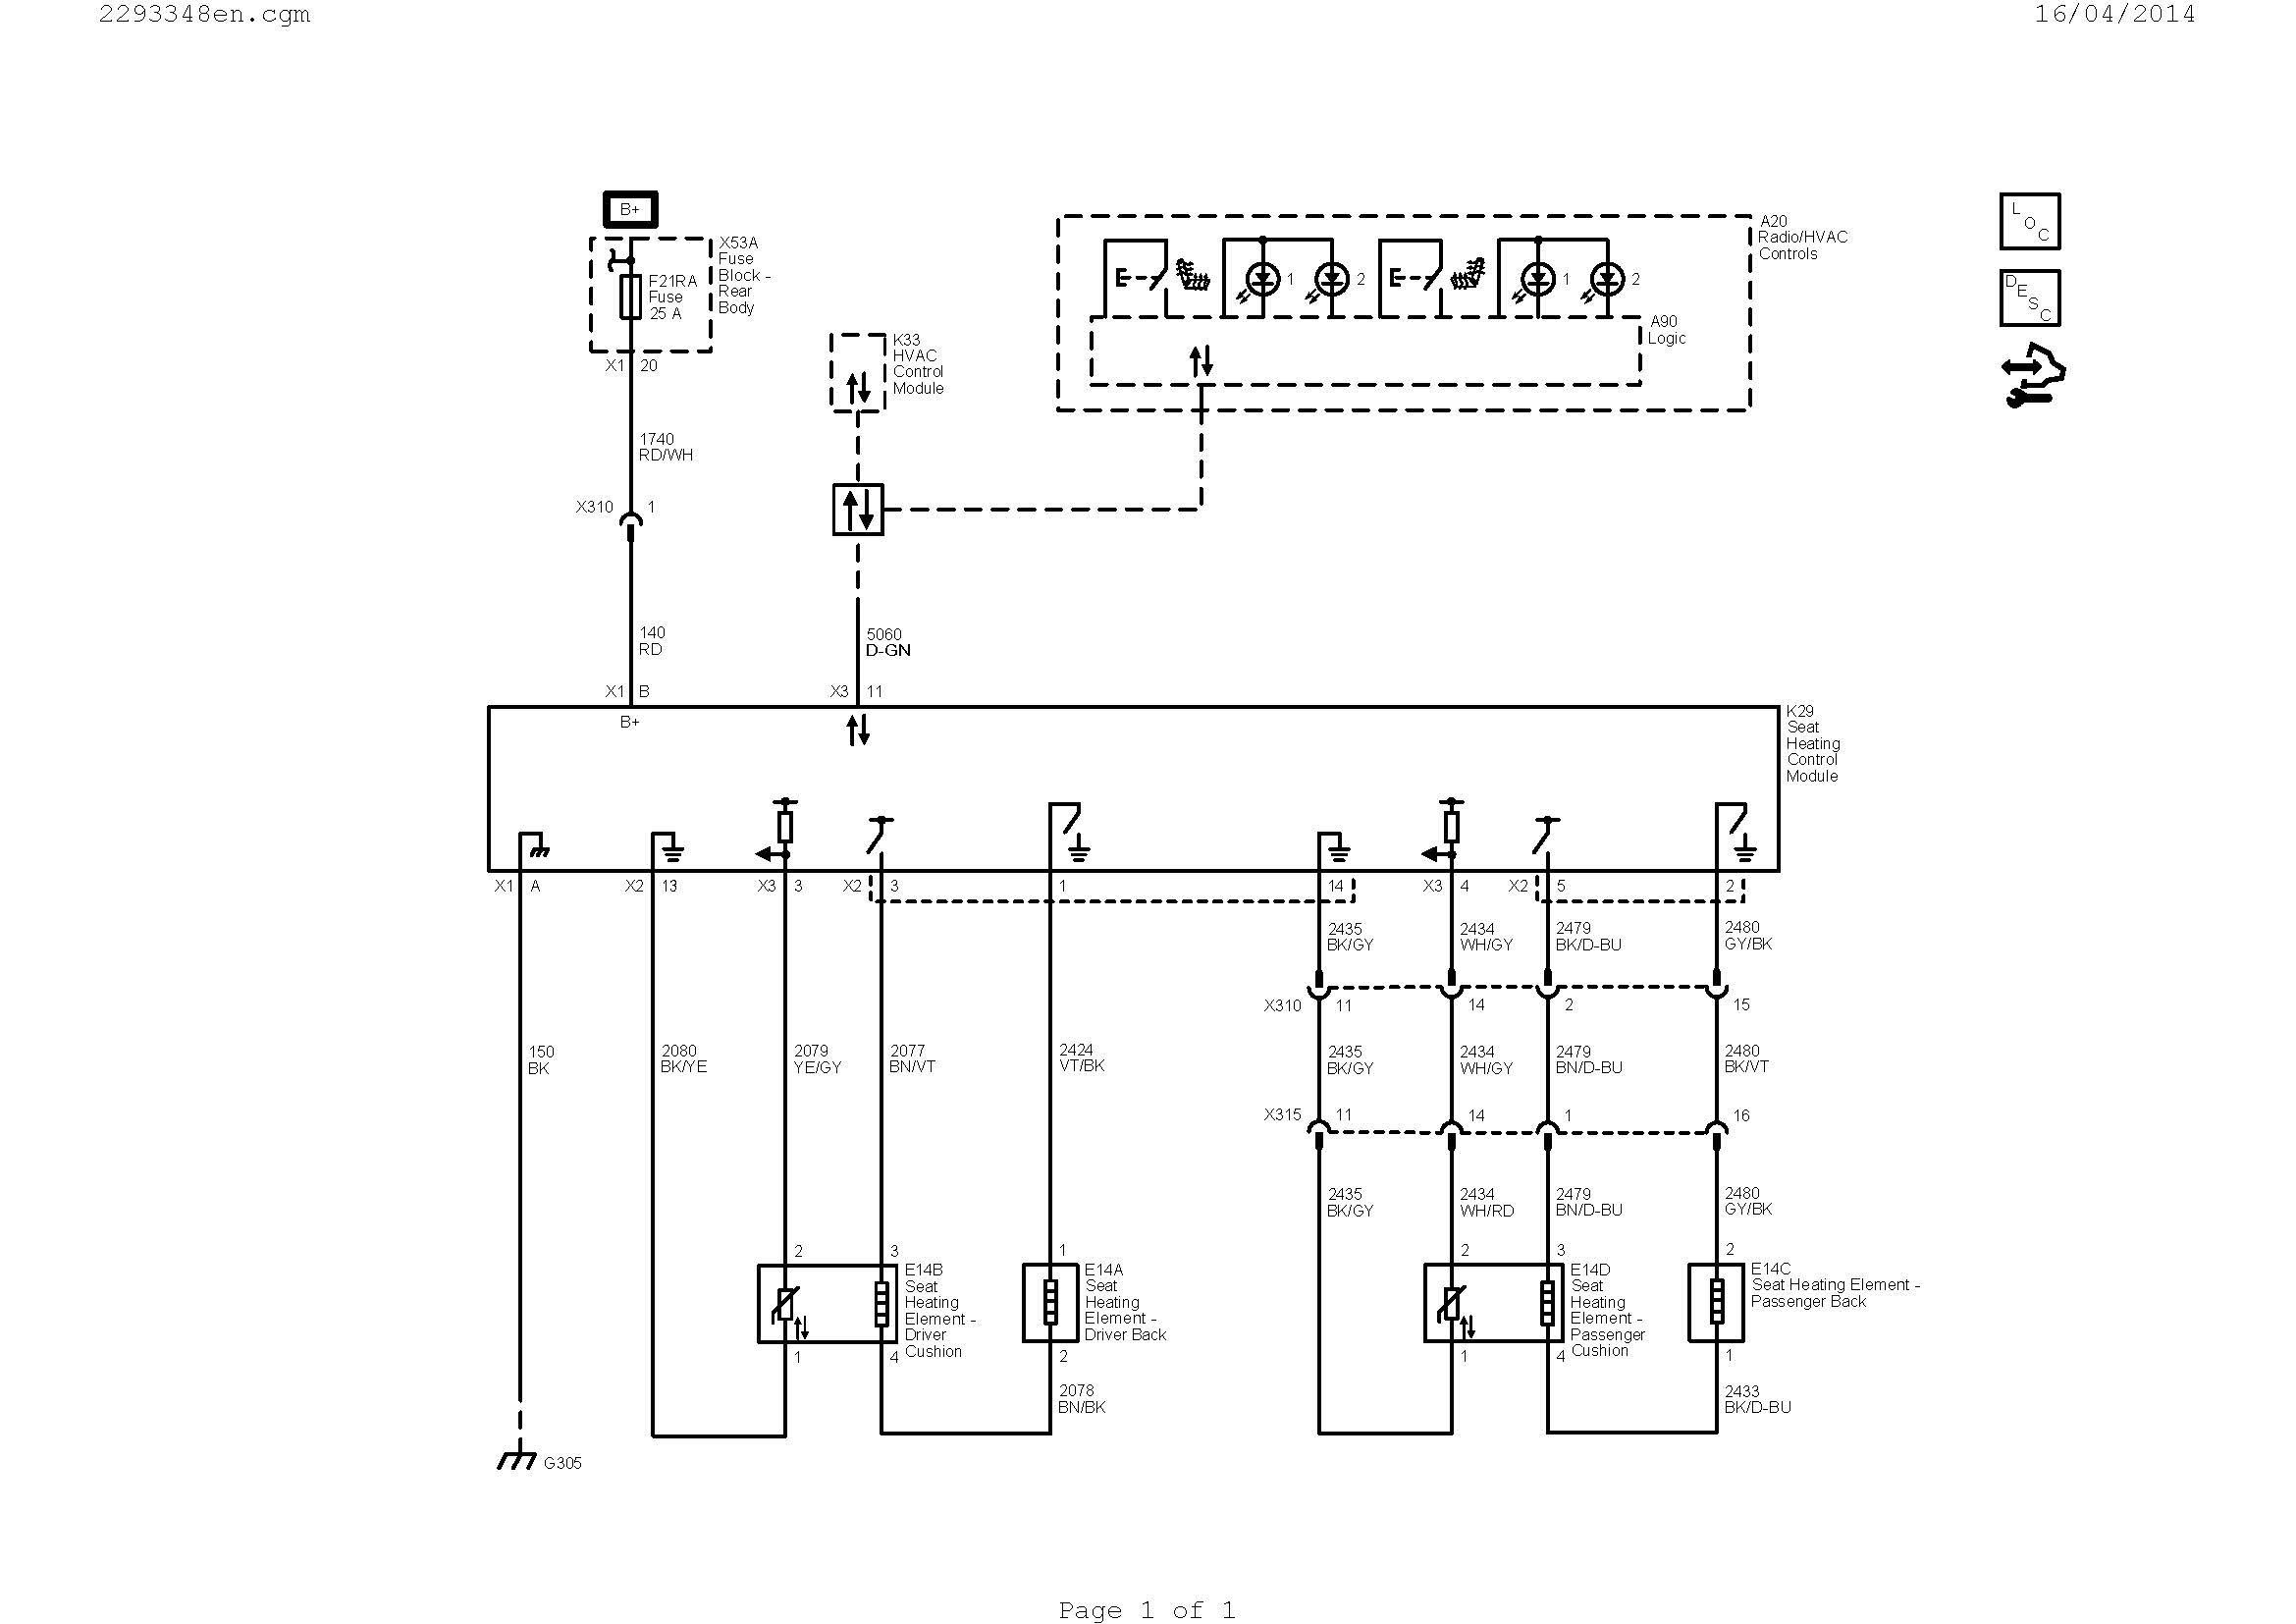 Switch Wiring Diagram Wiring Diagram for A Relay Switch Save Wiring Diagram